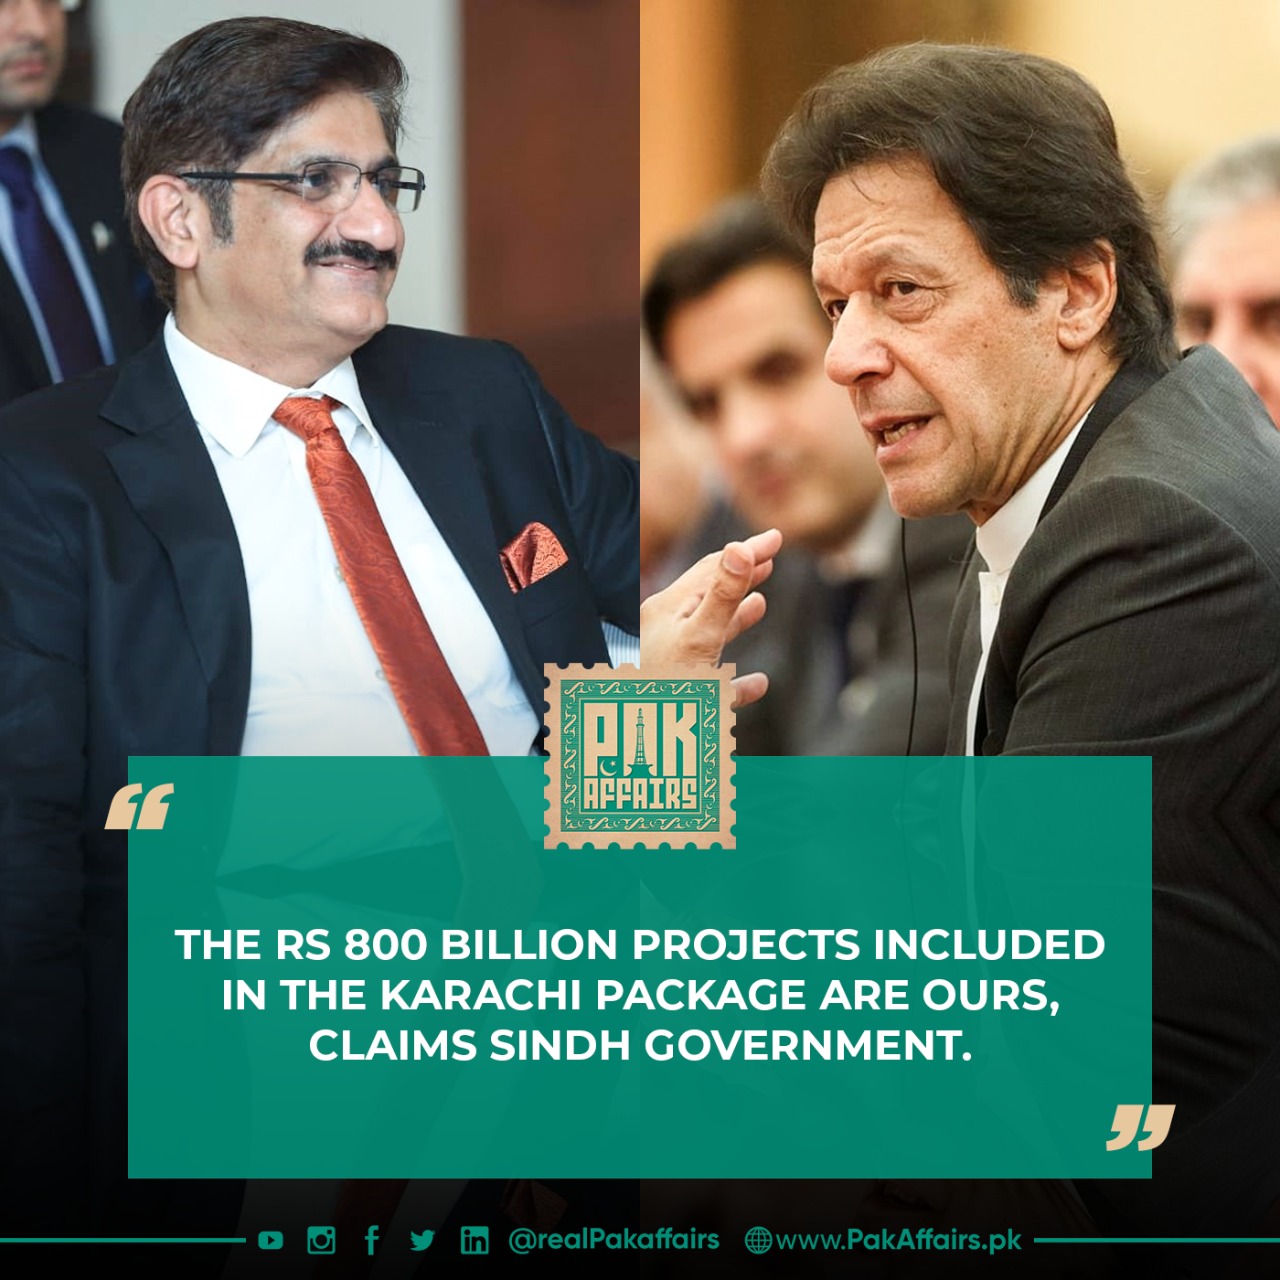 The 800 billion projects included in the Karachi package are ours, claims Sindh government.